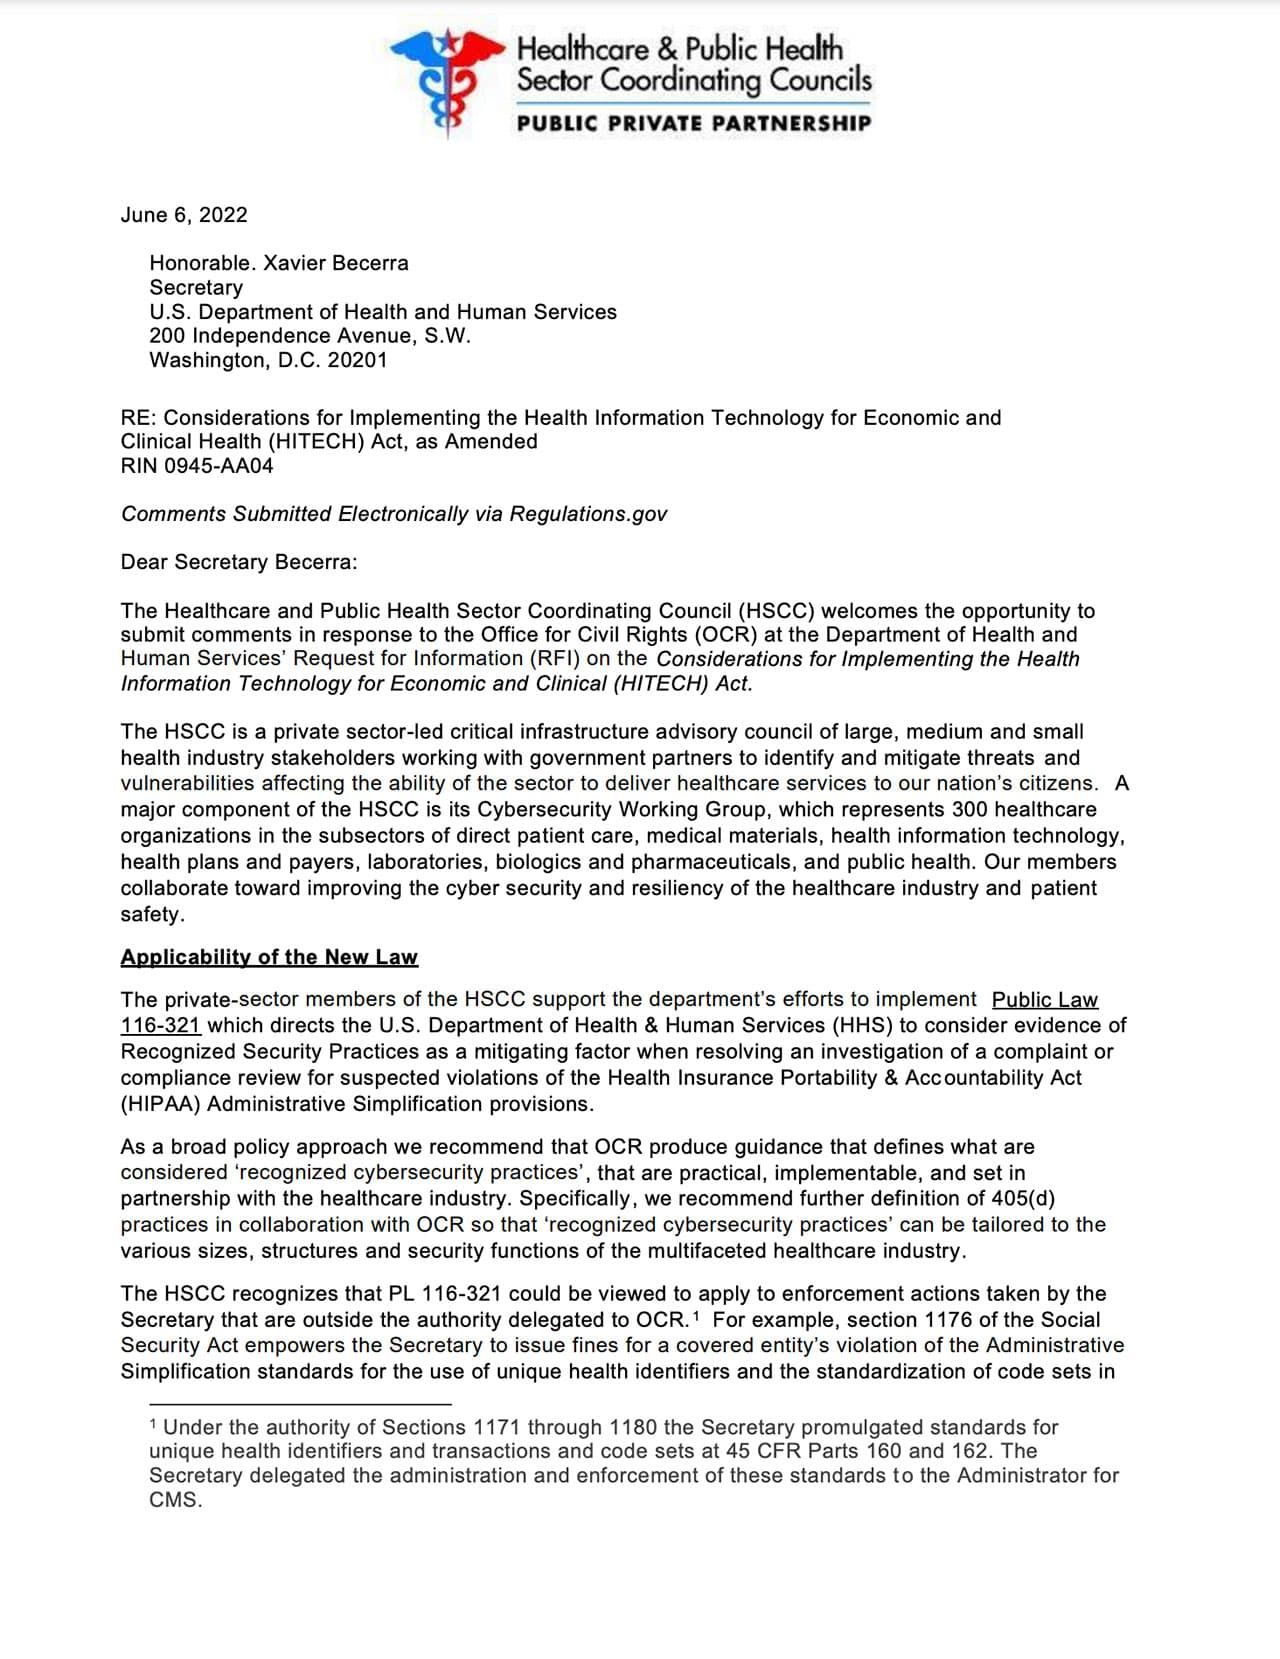 Health Sector Coordinating Council RFI Comment Letter